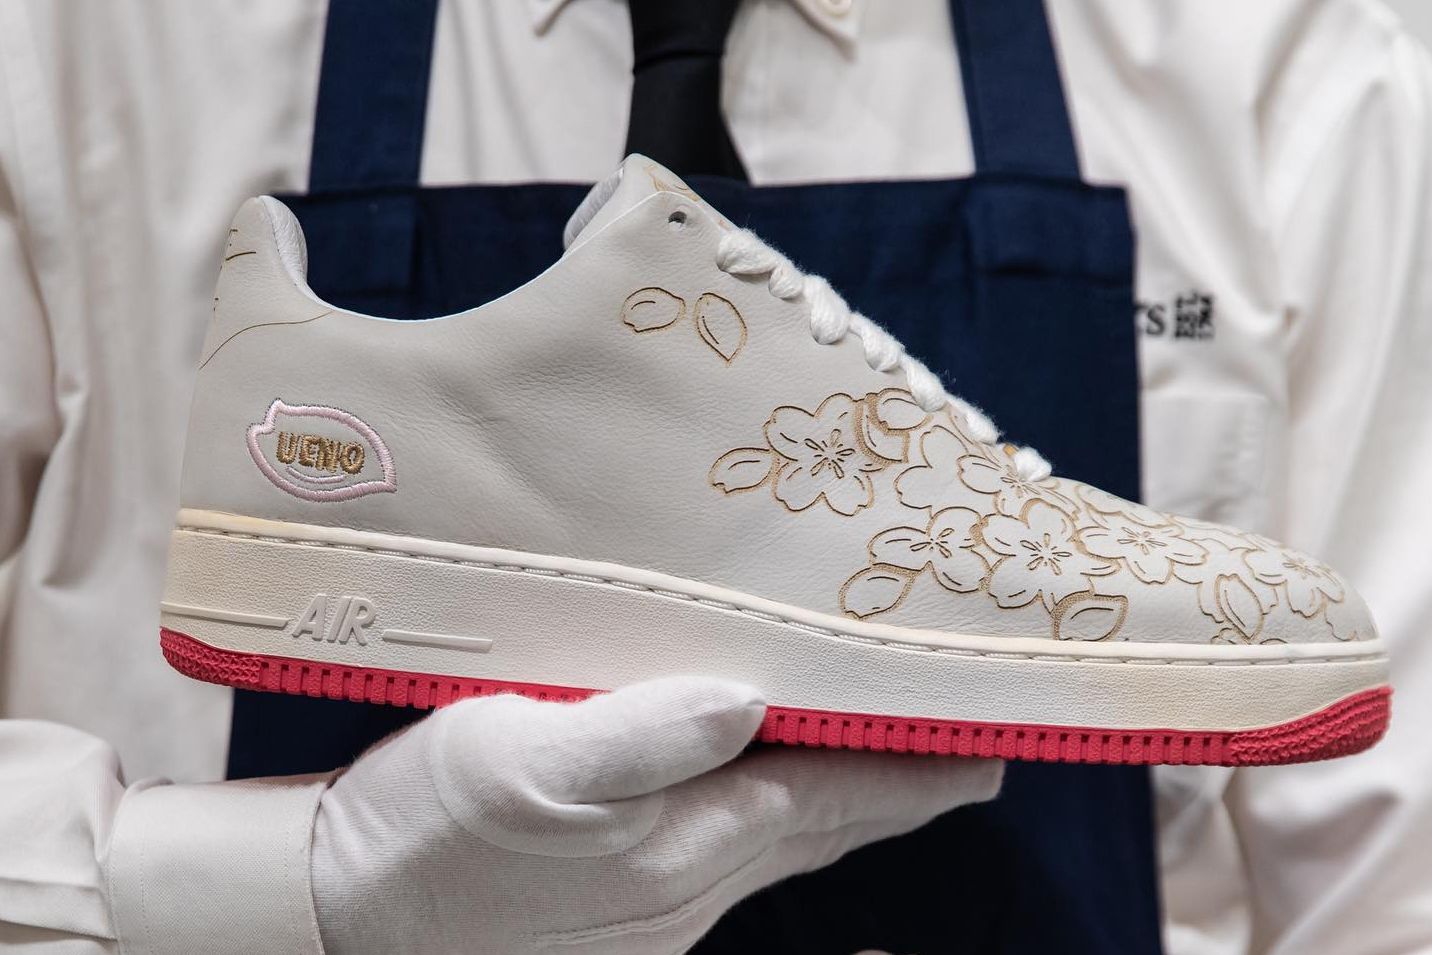 Sotheby's '40 for 40' Auction Nike Air Force 1